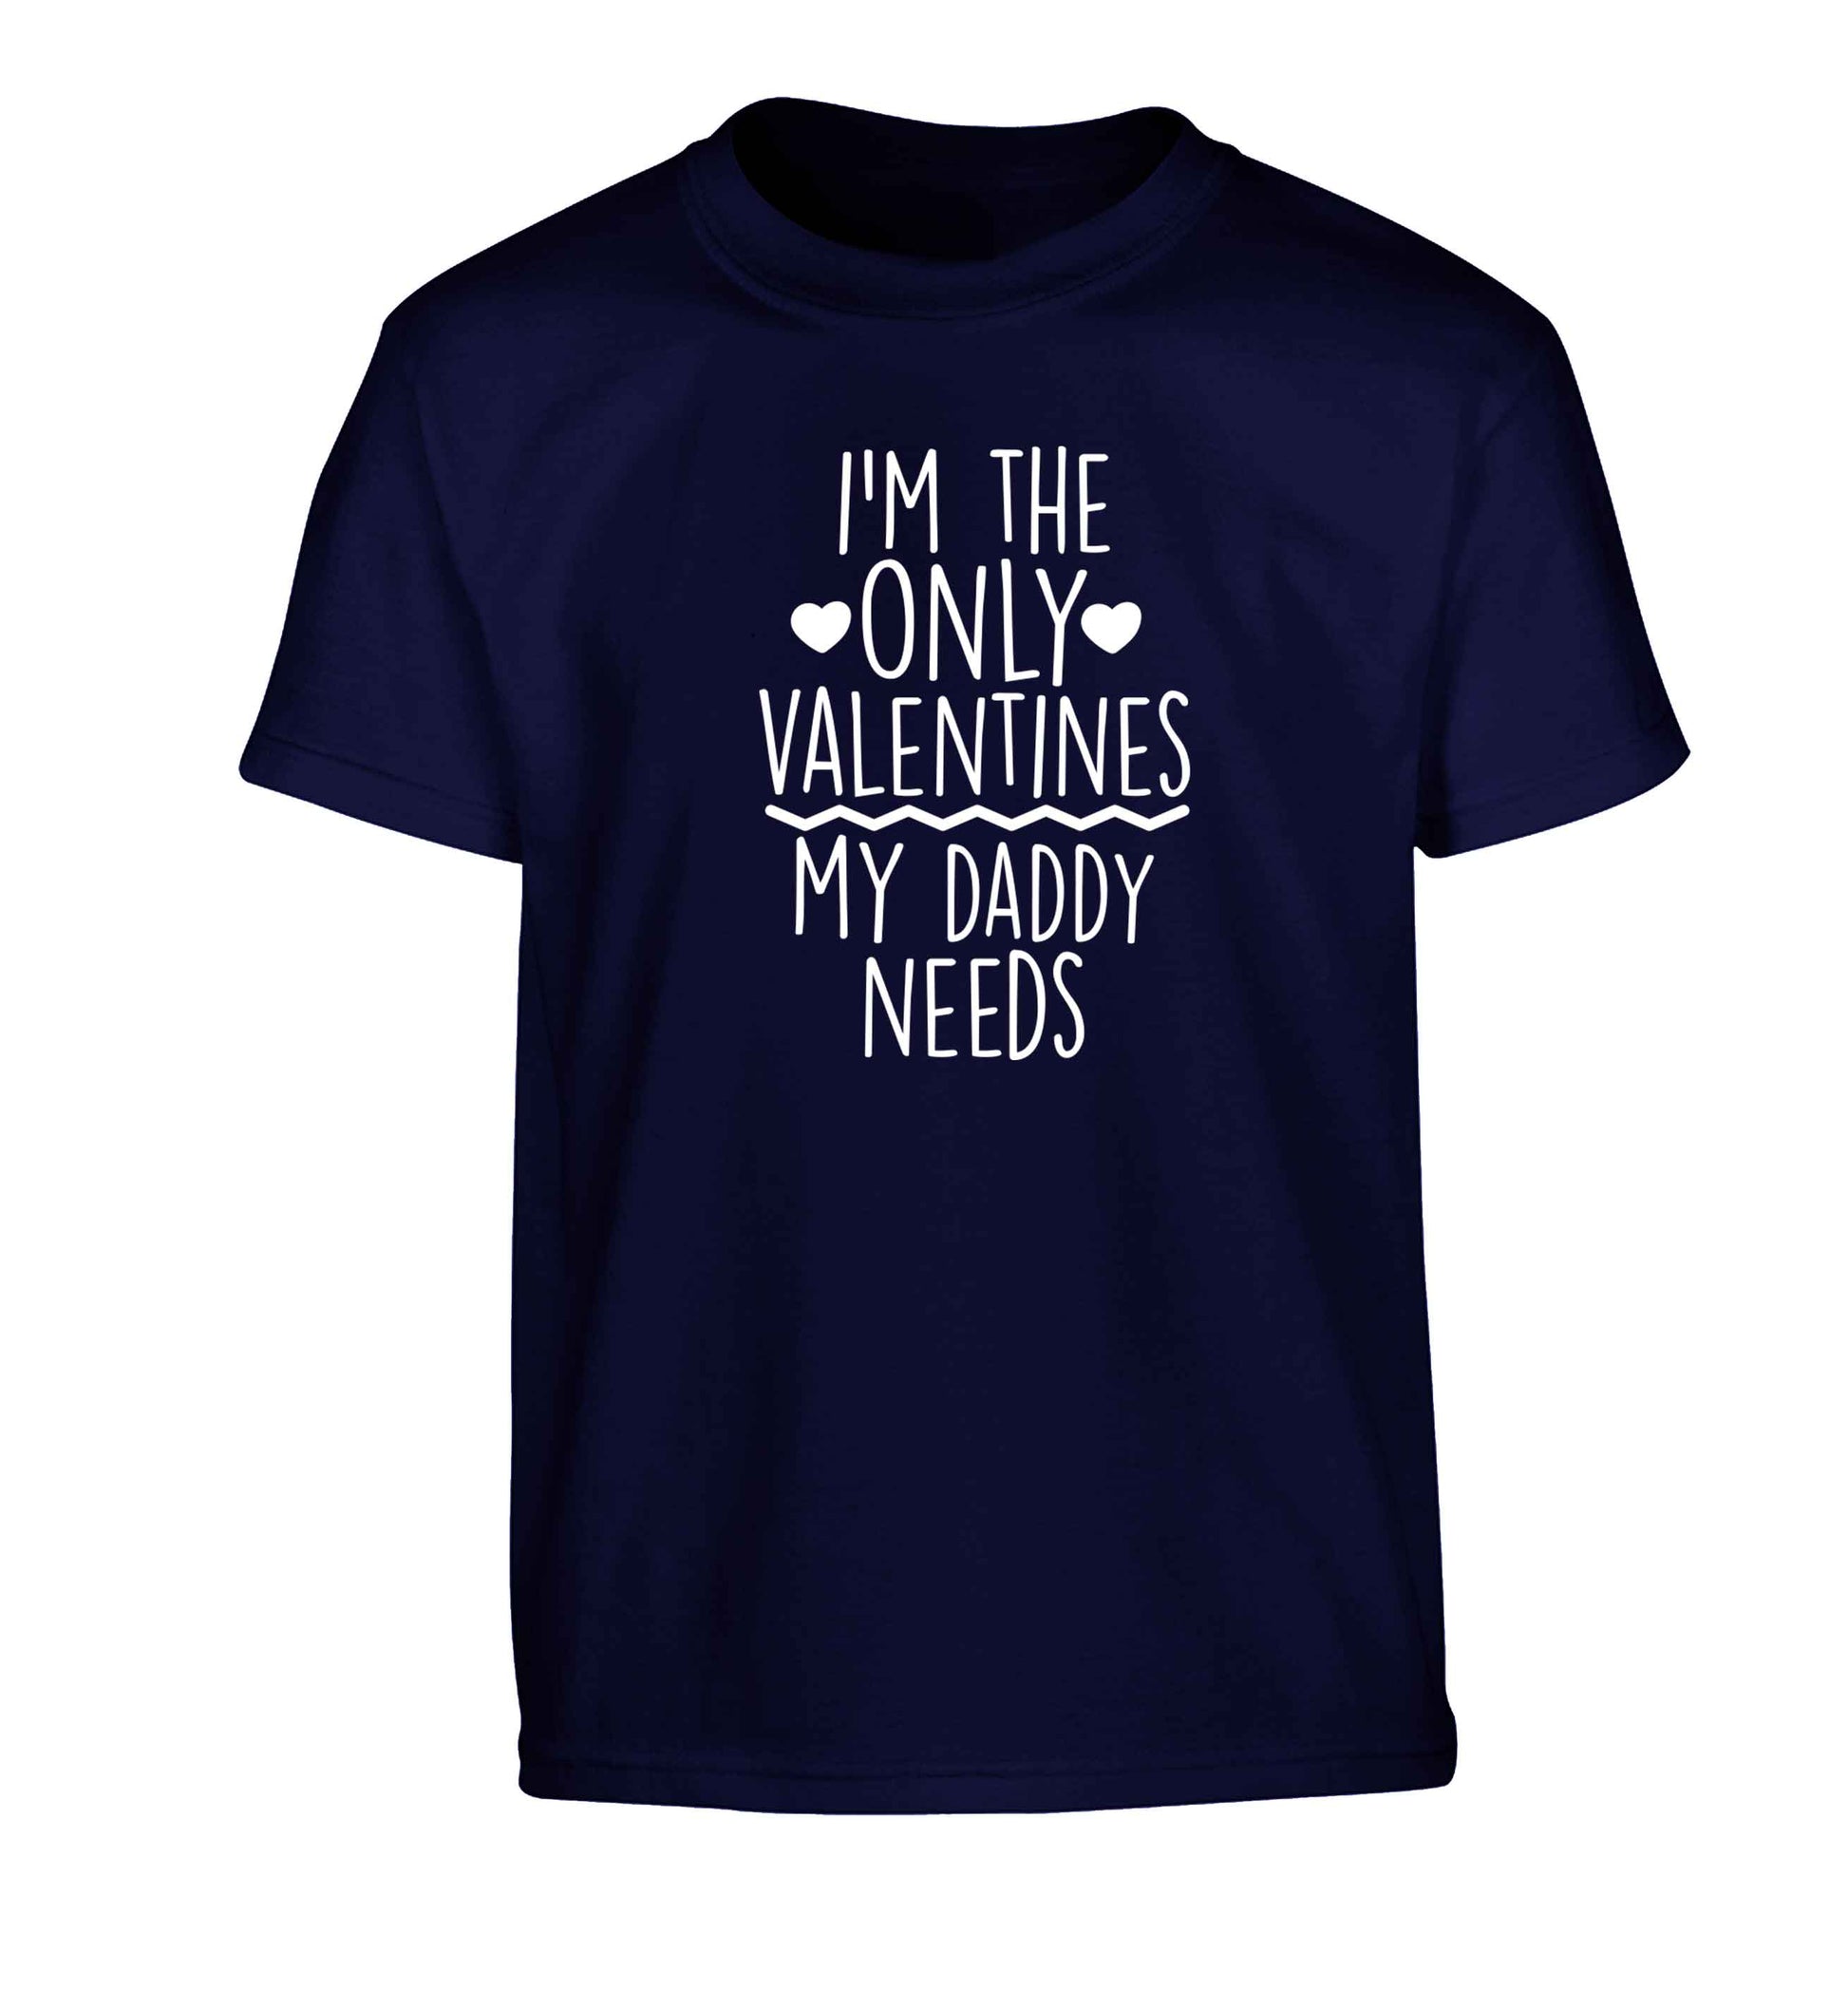 I'm the only valentines my daddy needs Children's navy Tshirt 12-13 Years